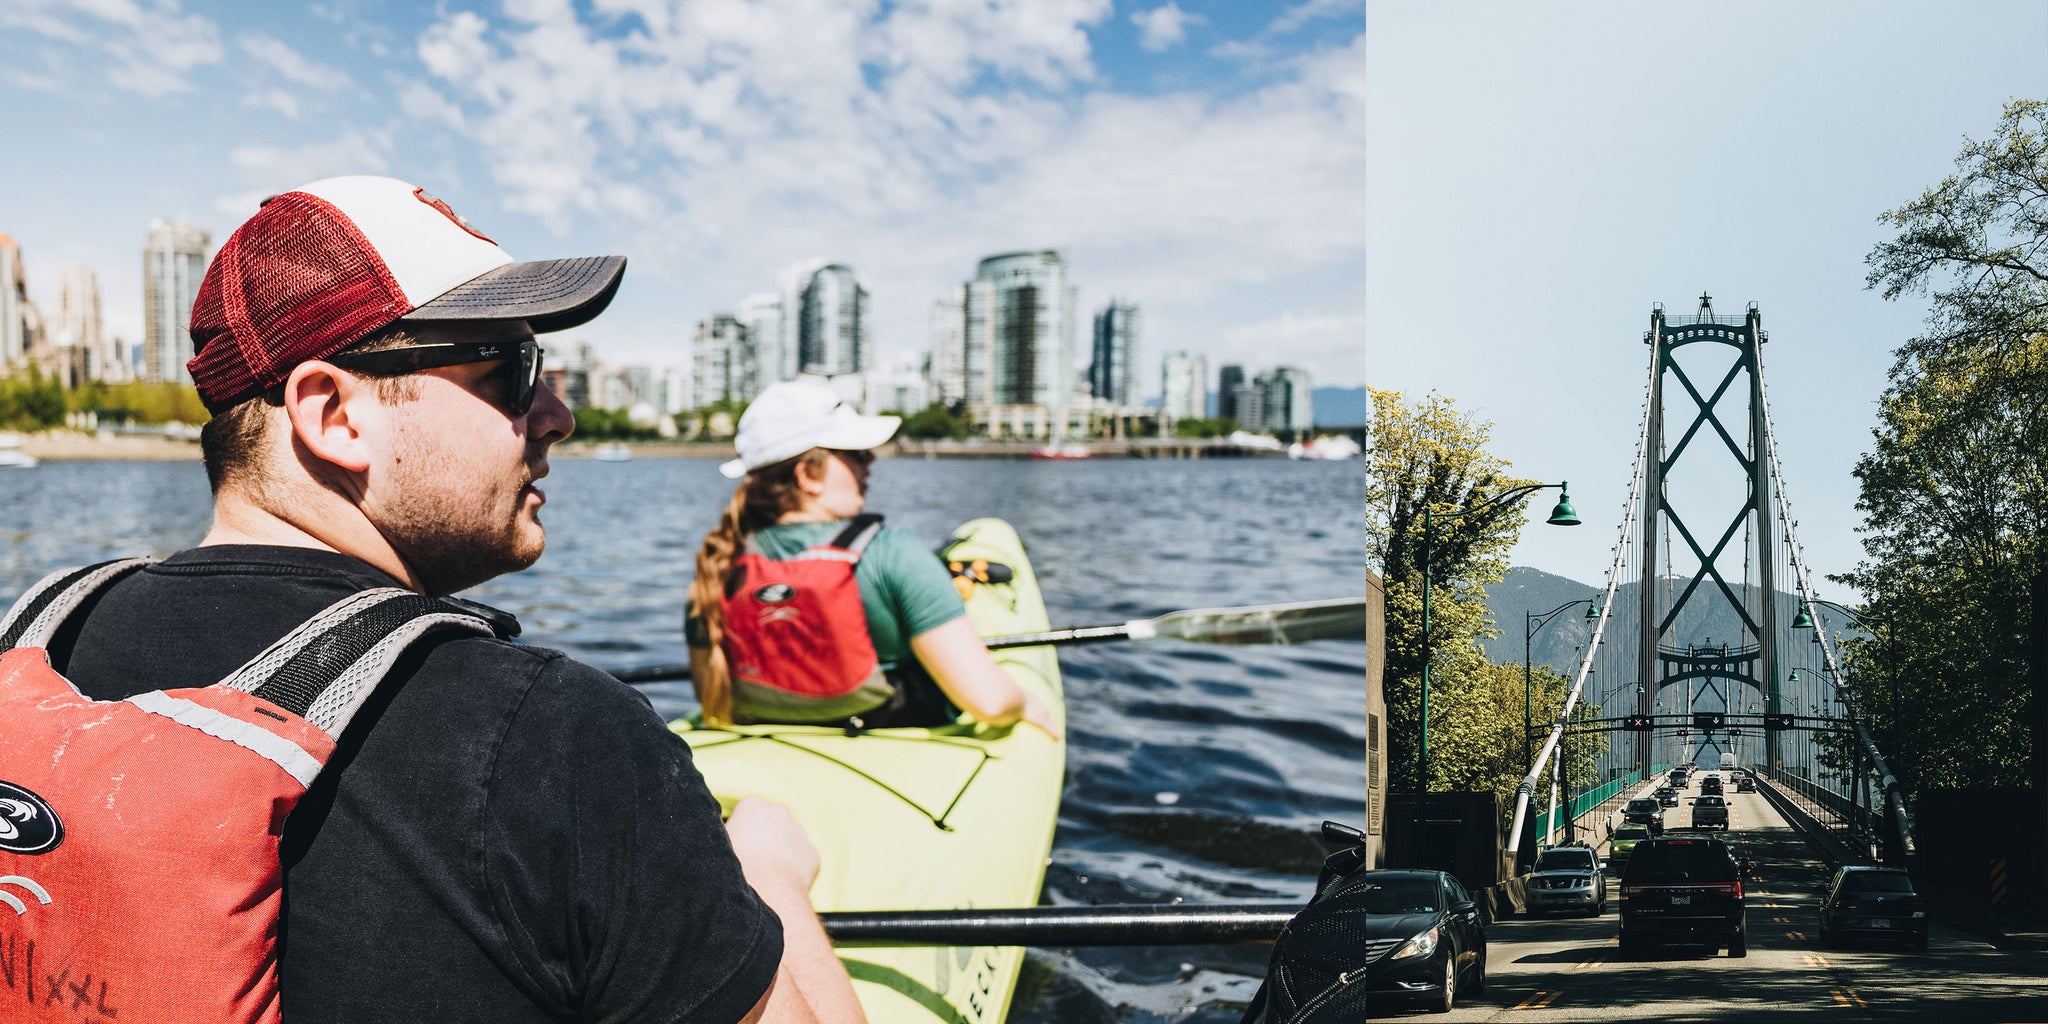 Brandon Lind's Excellent Adventure in Vancouver with Bather